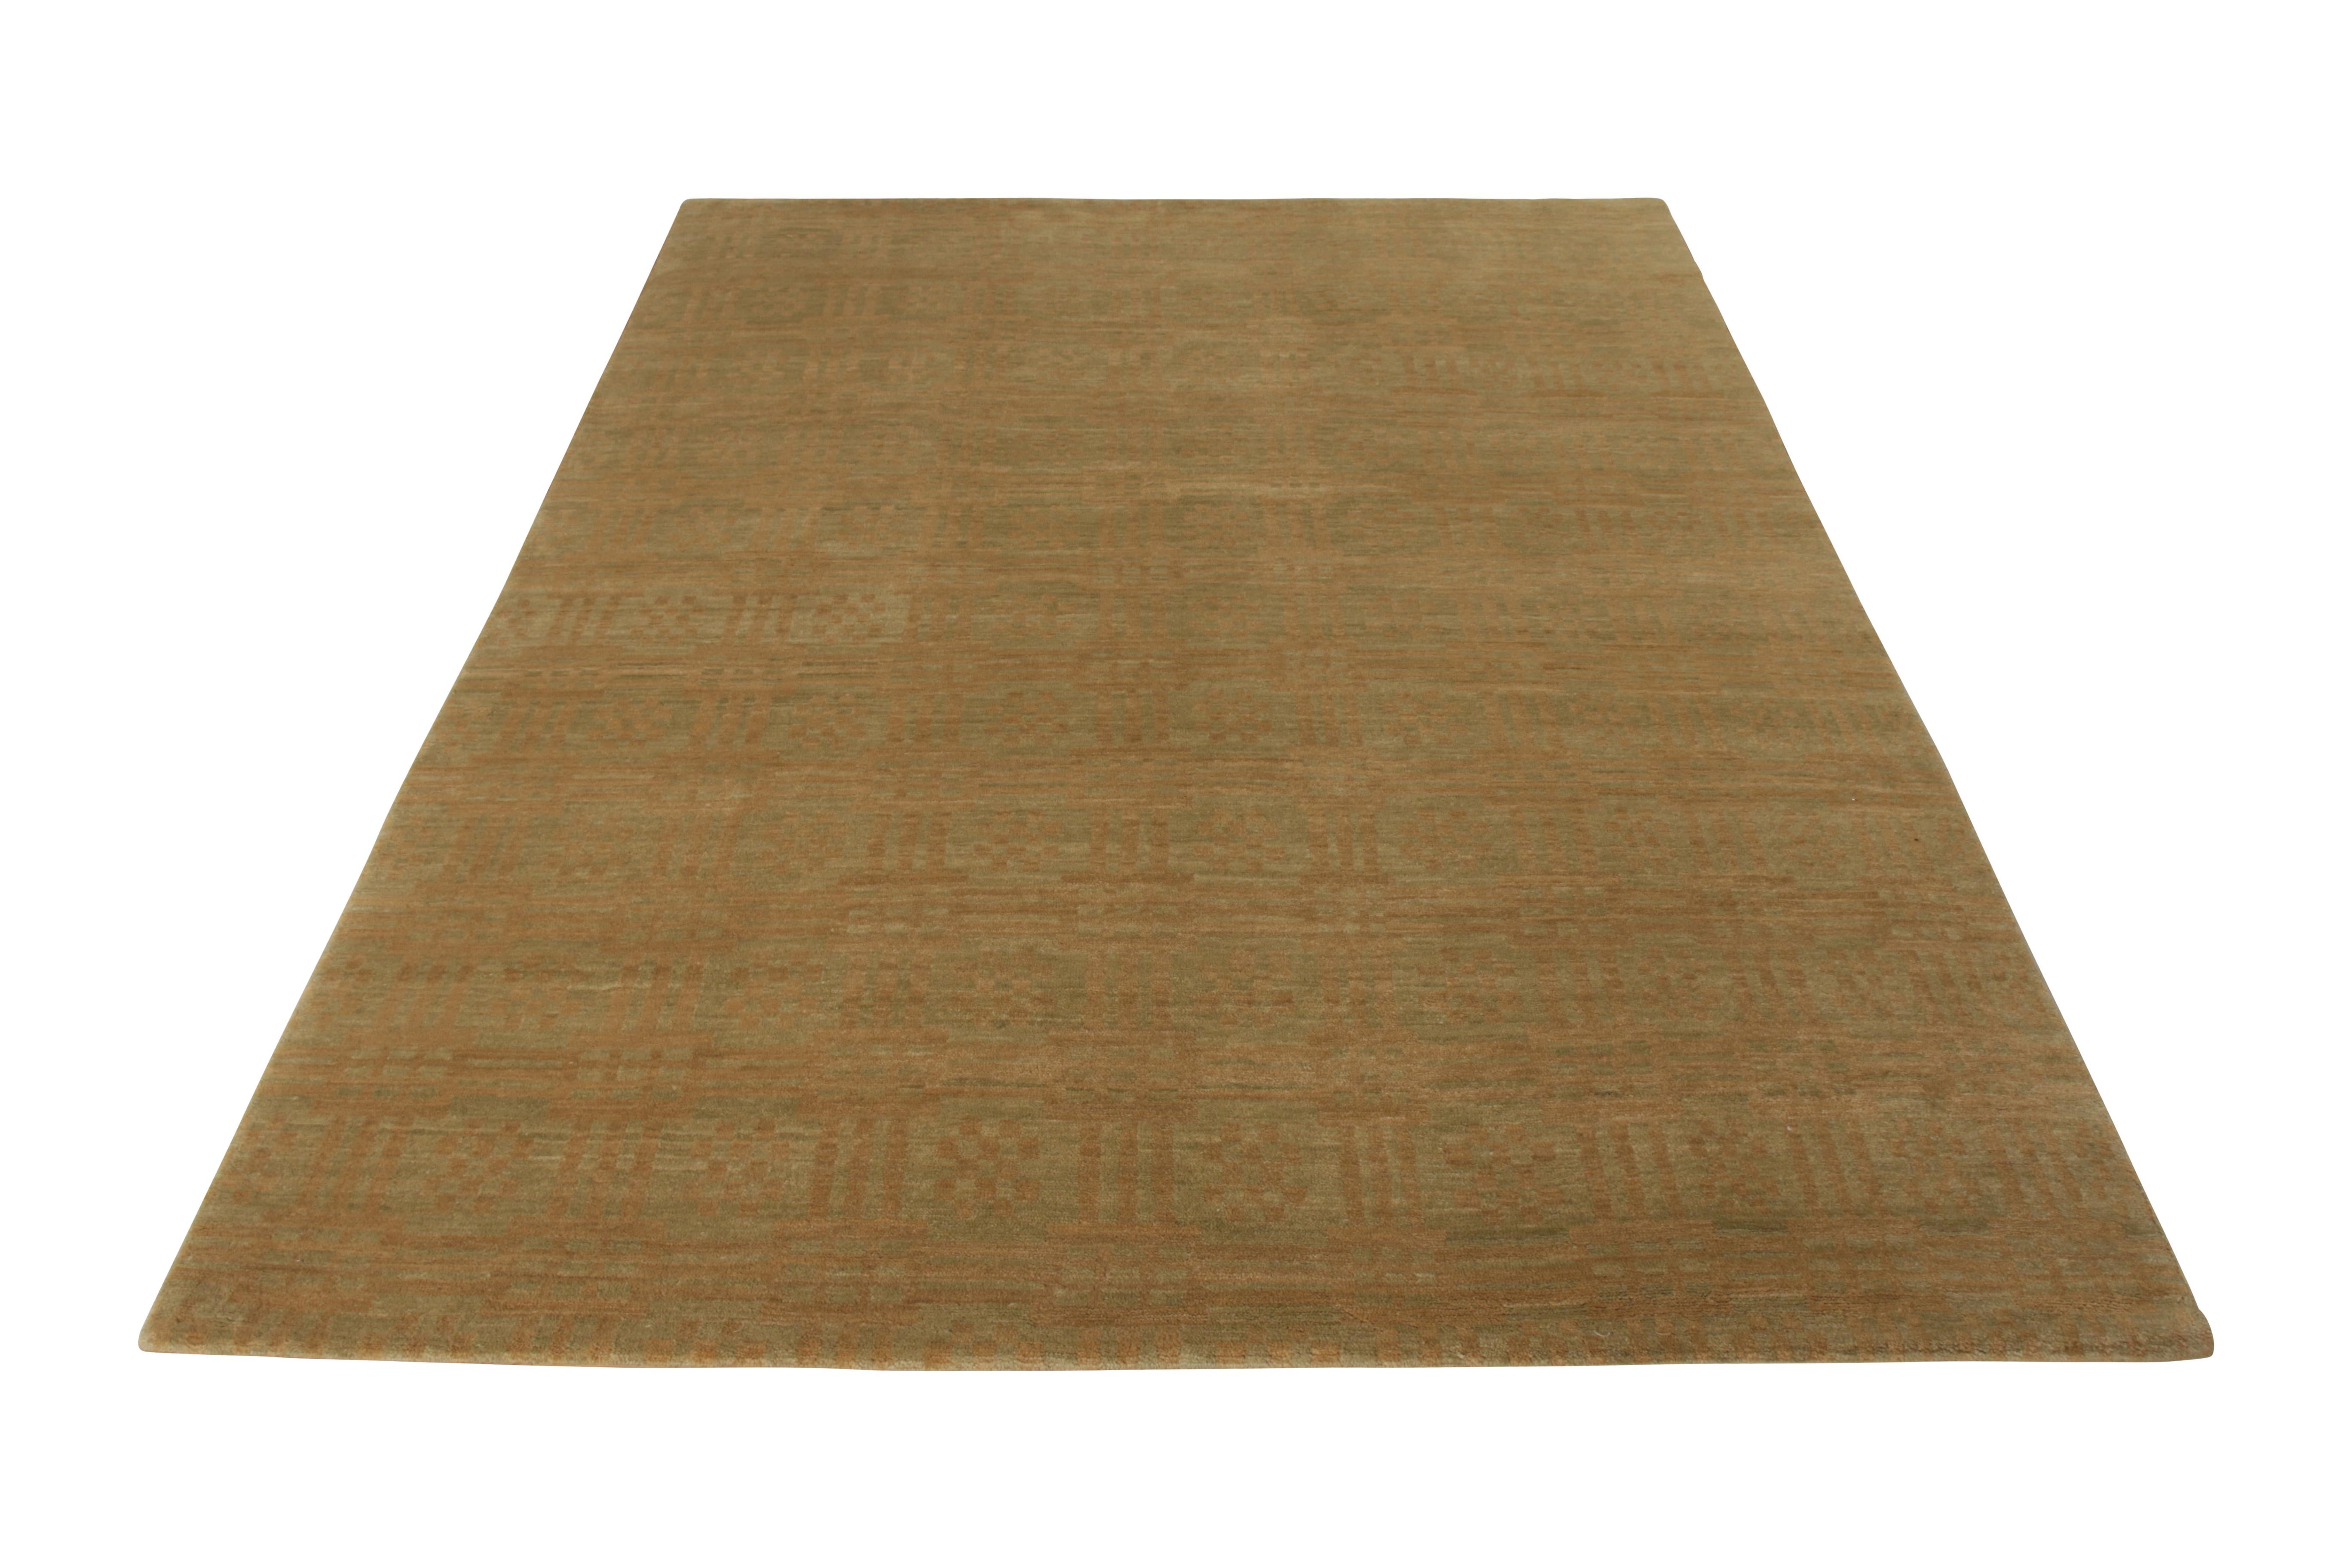 Art Deco Rug & Kilim's Handmade Contemporary Rug in Green and Brown Geometric Pattern